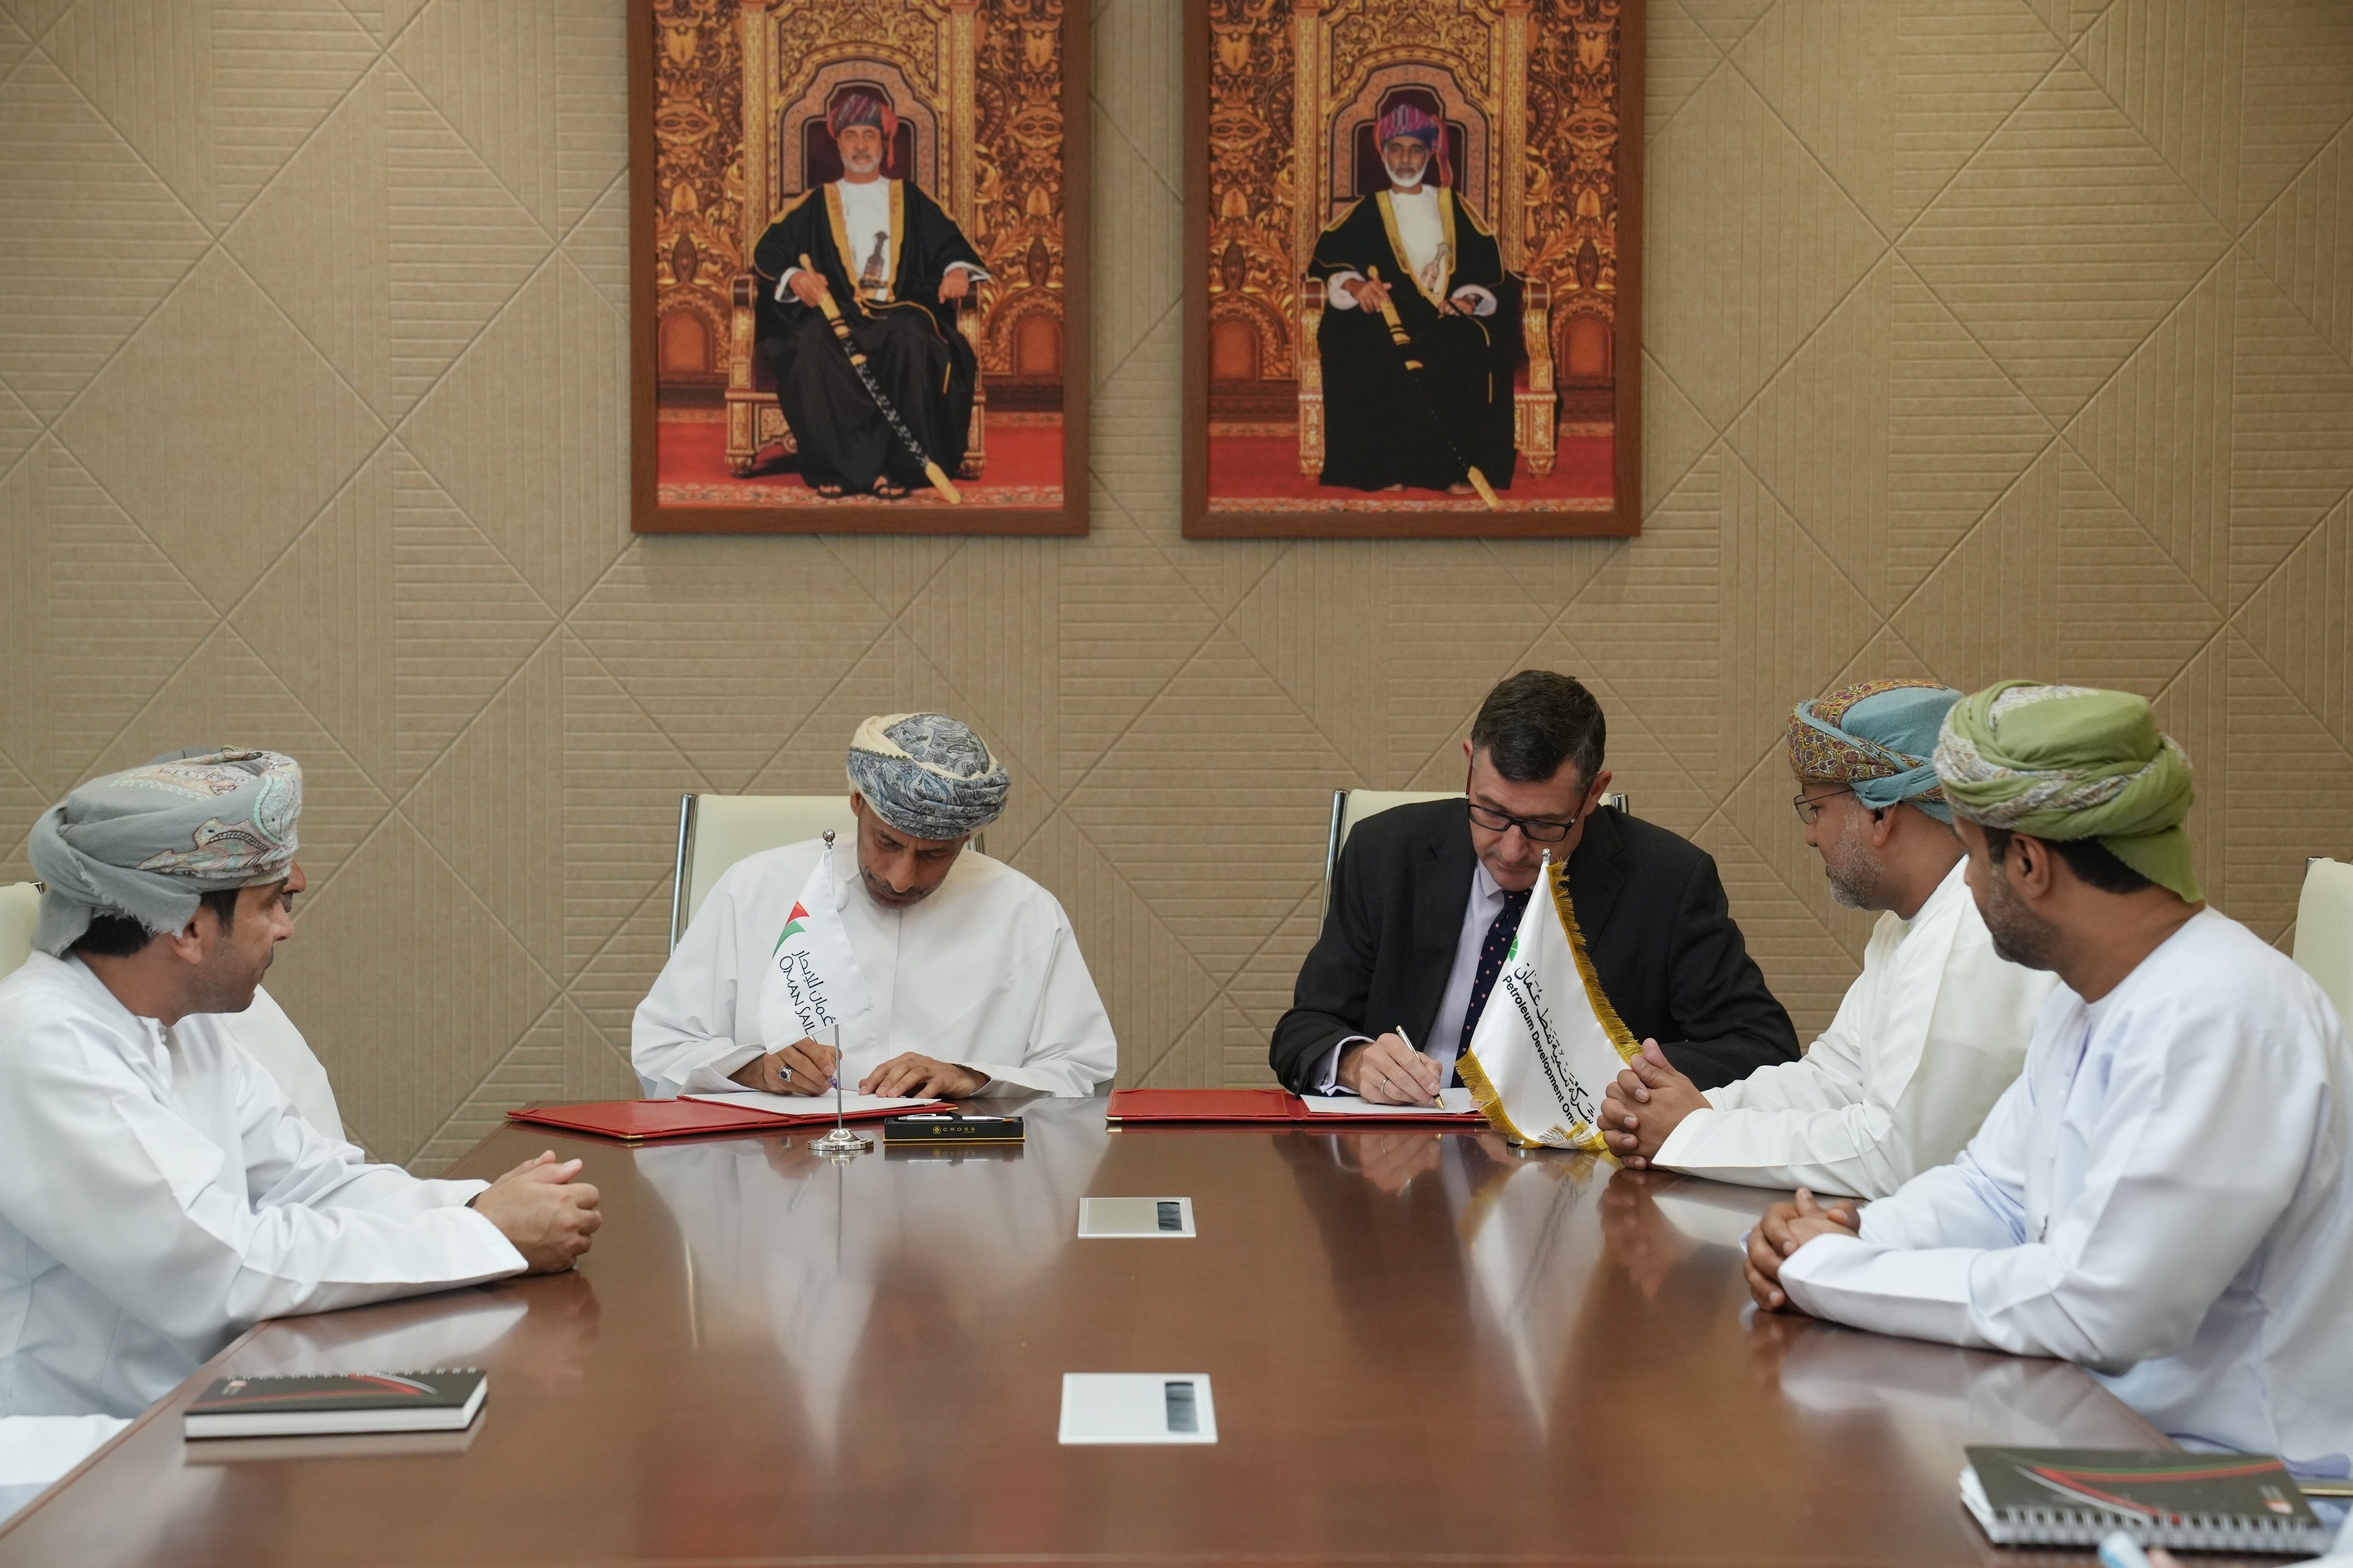 PDO signs a Memorandum of Collaboration to unlock sailing and training opportunities in Oman